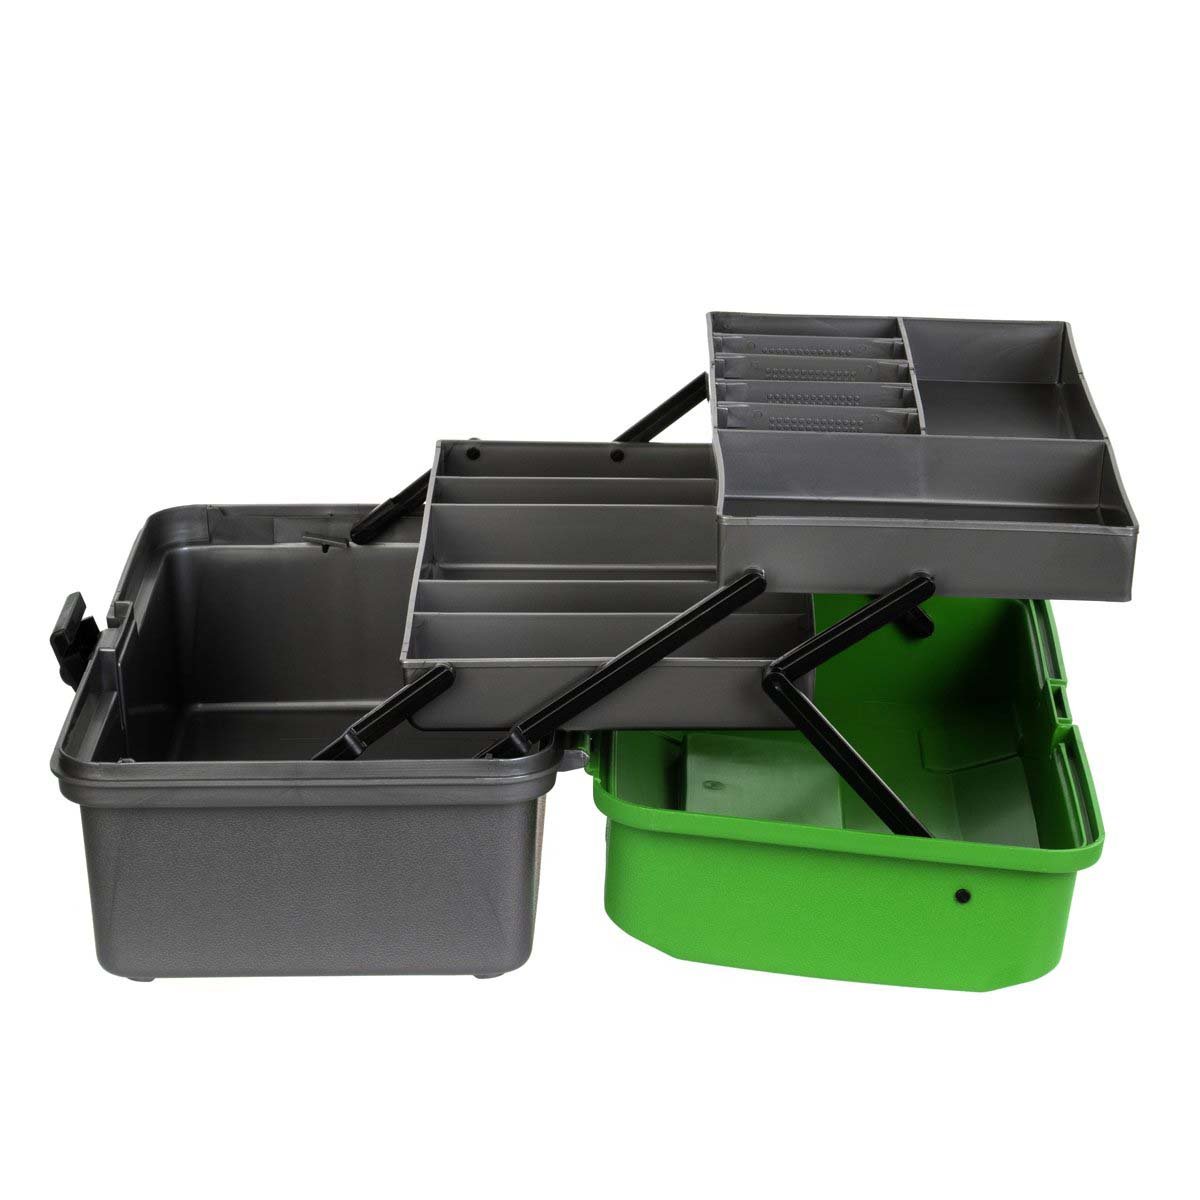 Fishing Tackle Box 2 Fold Out Multi-Tier Trays Fishing Gear at a low price